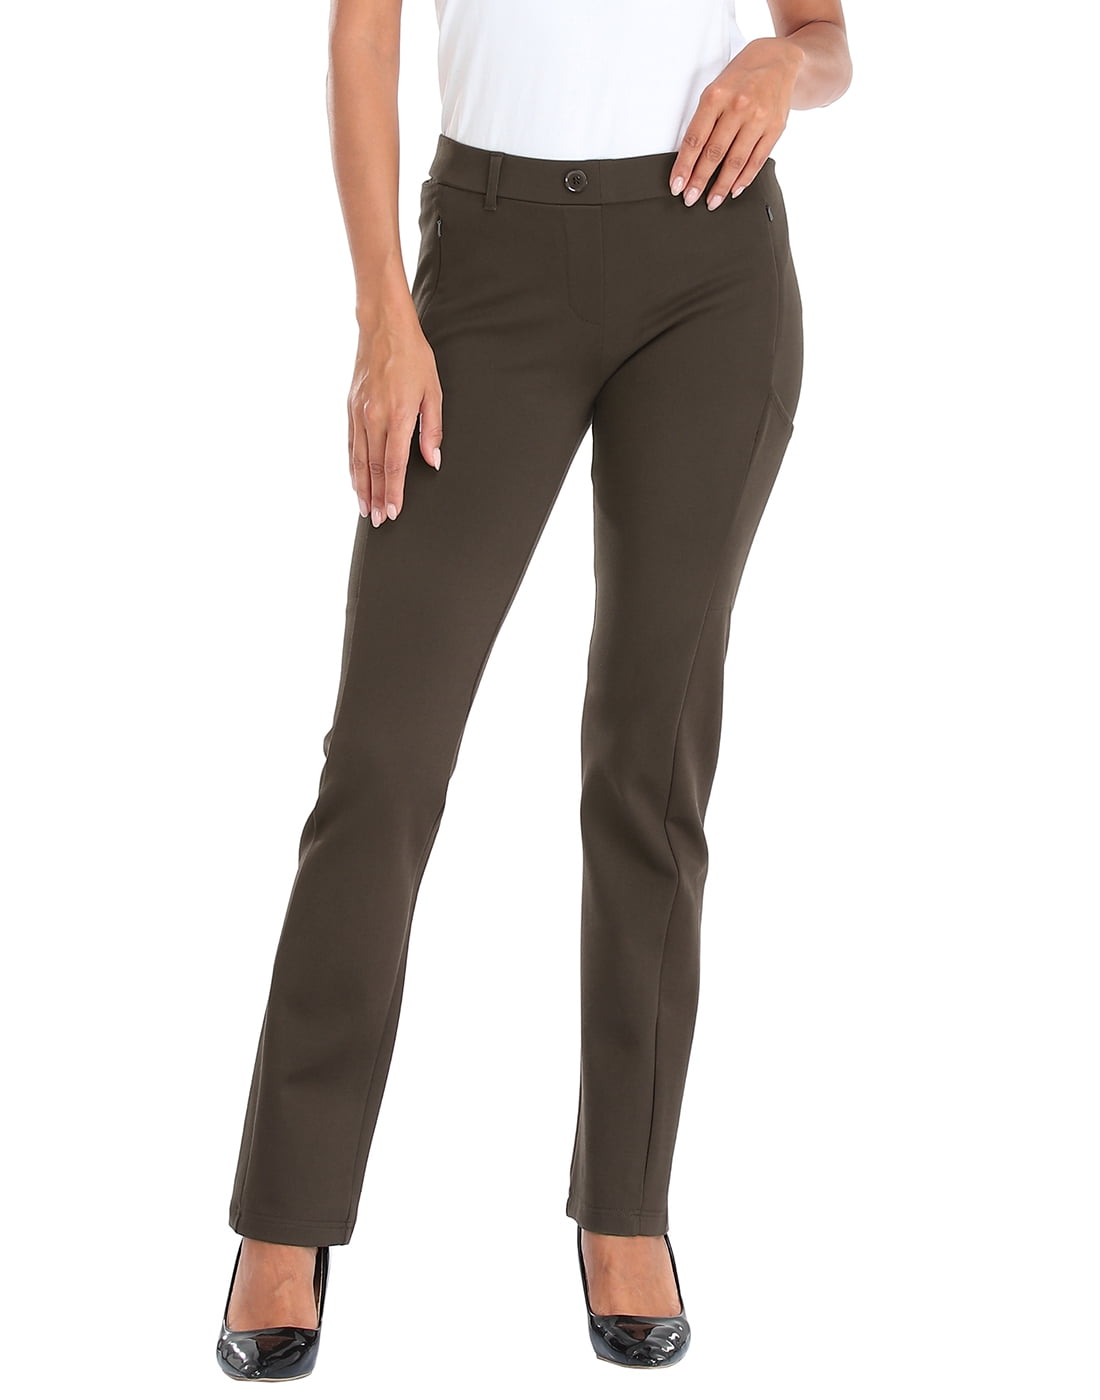  HDE Yoga Dress Pants for Women Straight Leg Pull On Pants with  8 Pockets Khaki - S : Clothing, Shoes & Jewelry